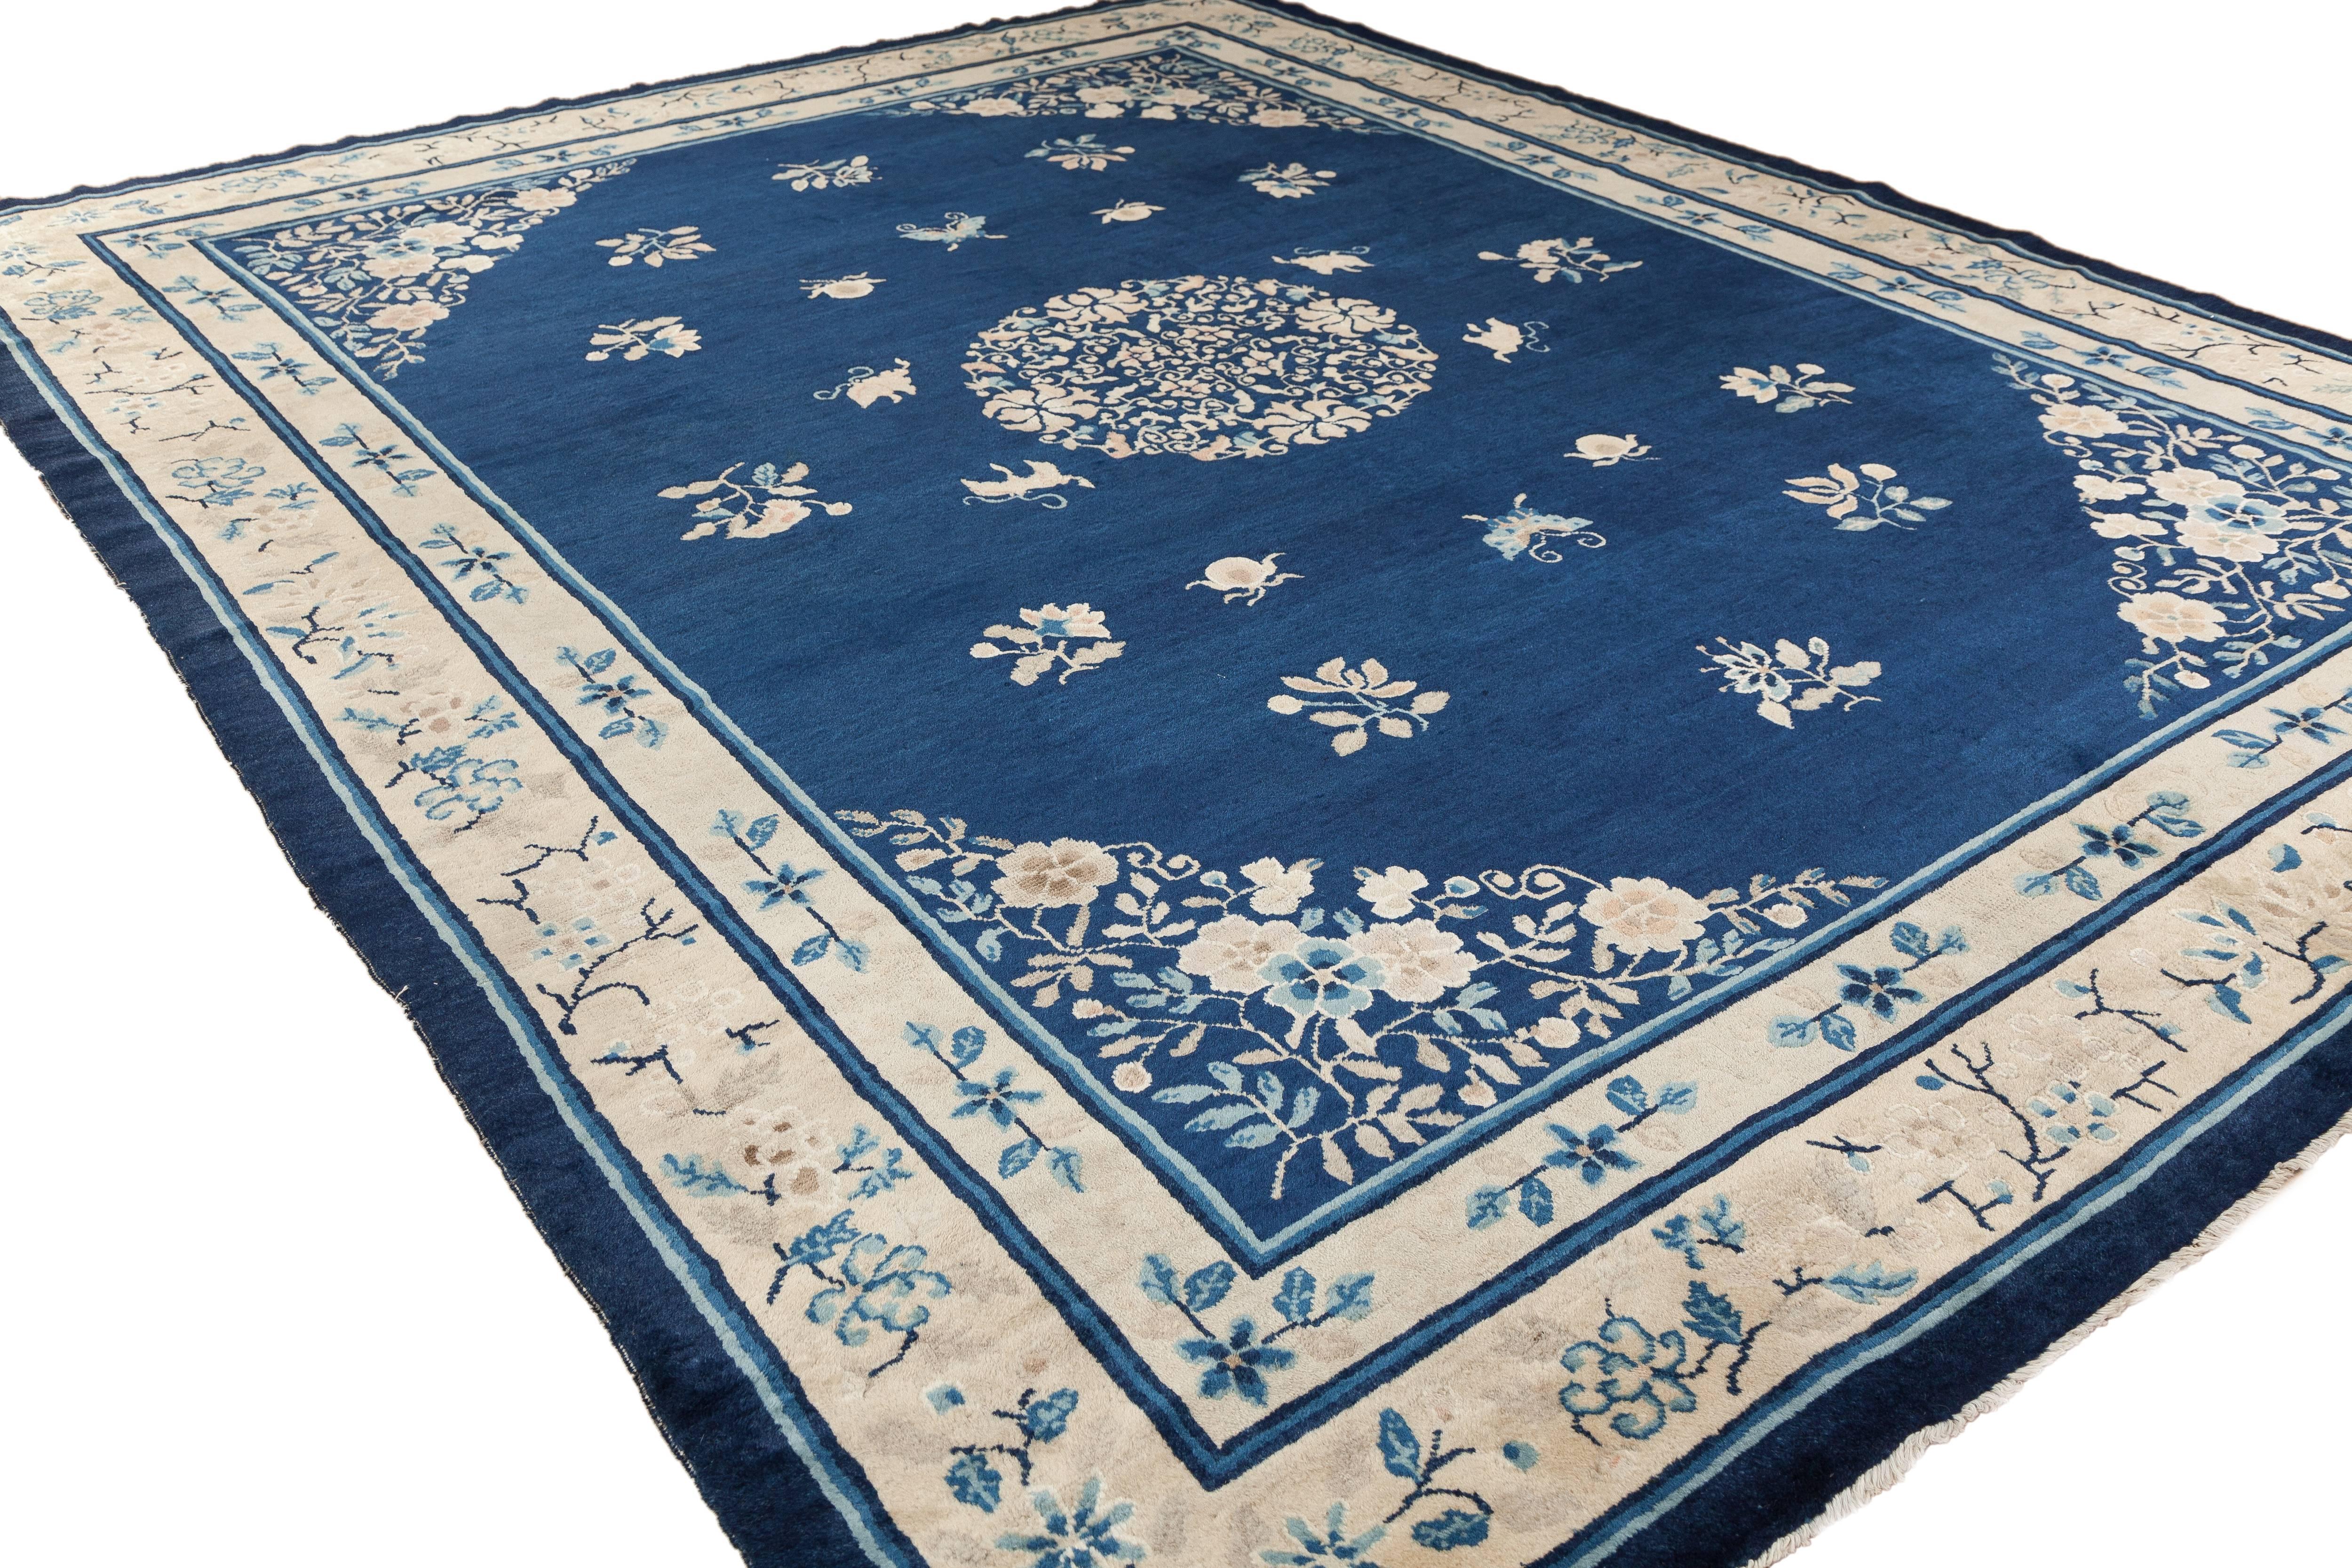 A Peking Chinese rug from China, dating to circa 1910. This piece features Classic restrained balance and color.